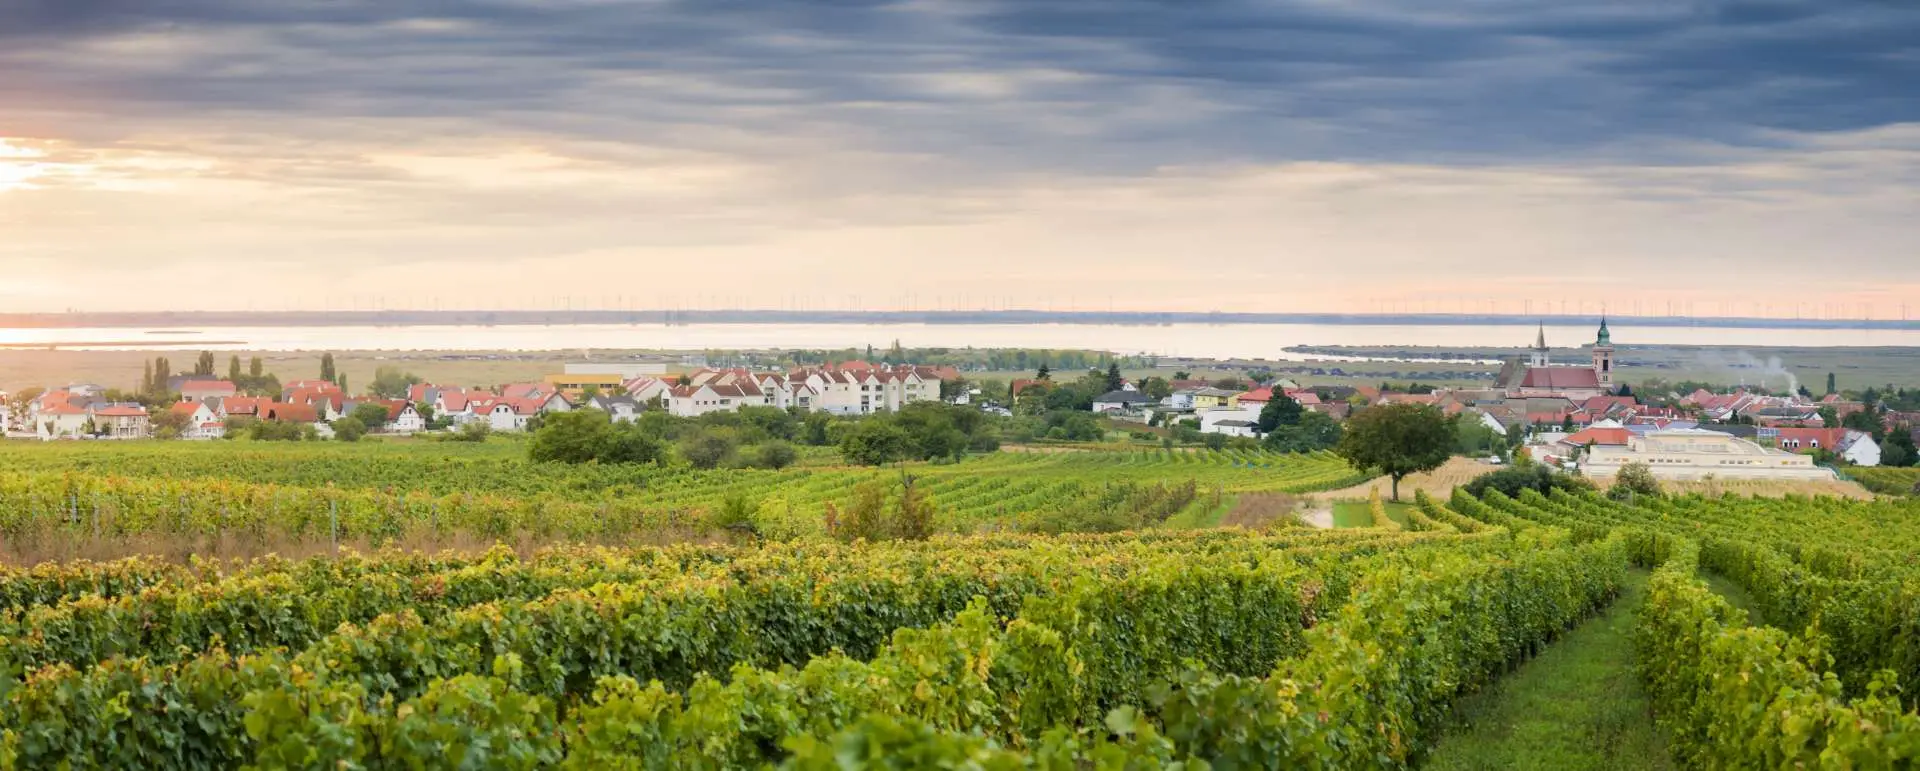 Burgenland - Top incentive travel hotels for rewarding experiences